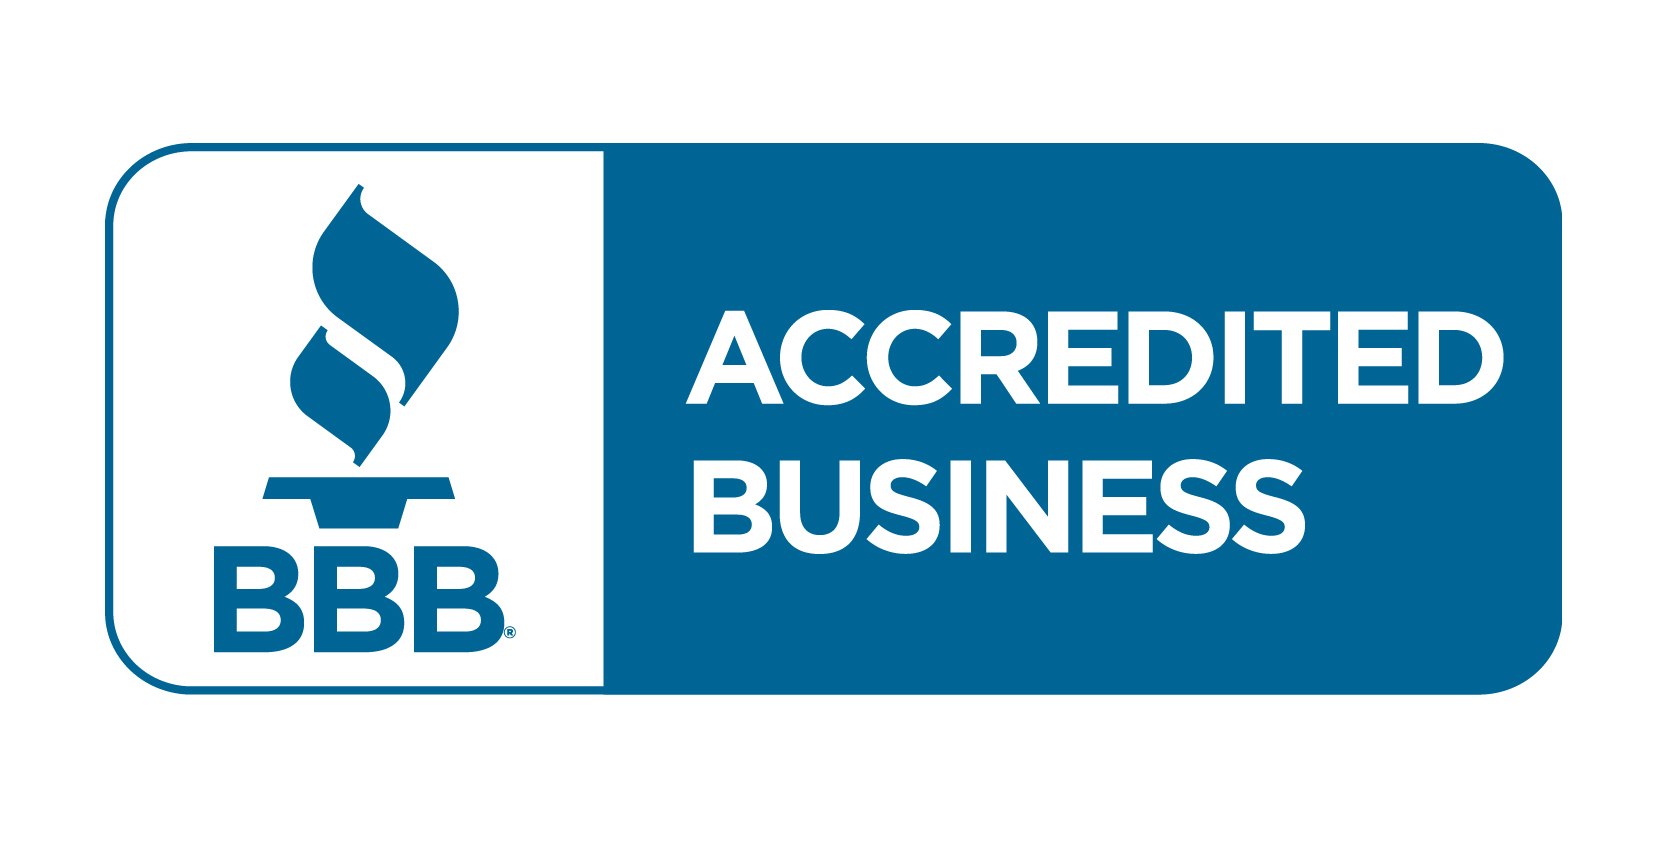 BBB Accredited Business | CarpetsPlus Of Wisconsin